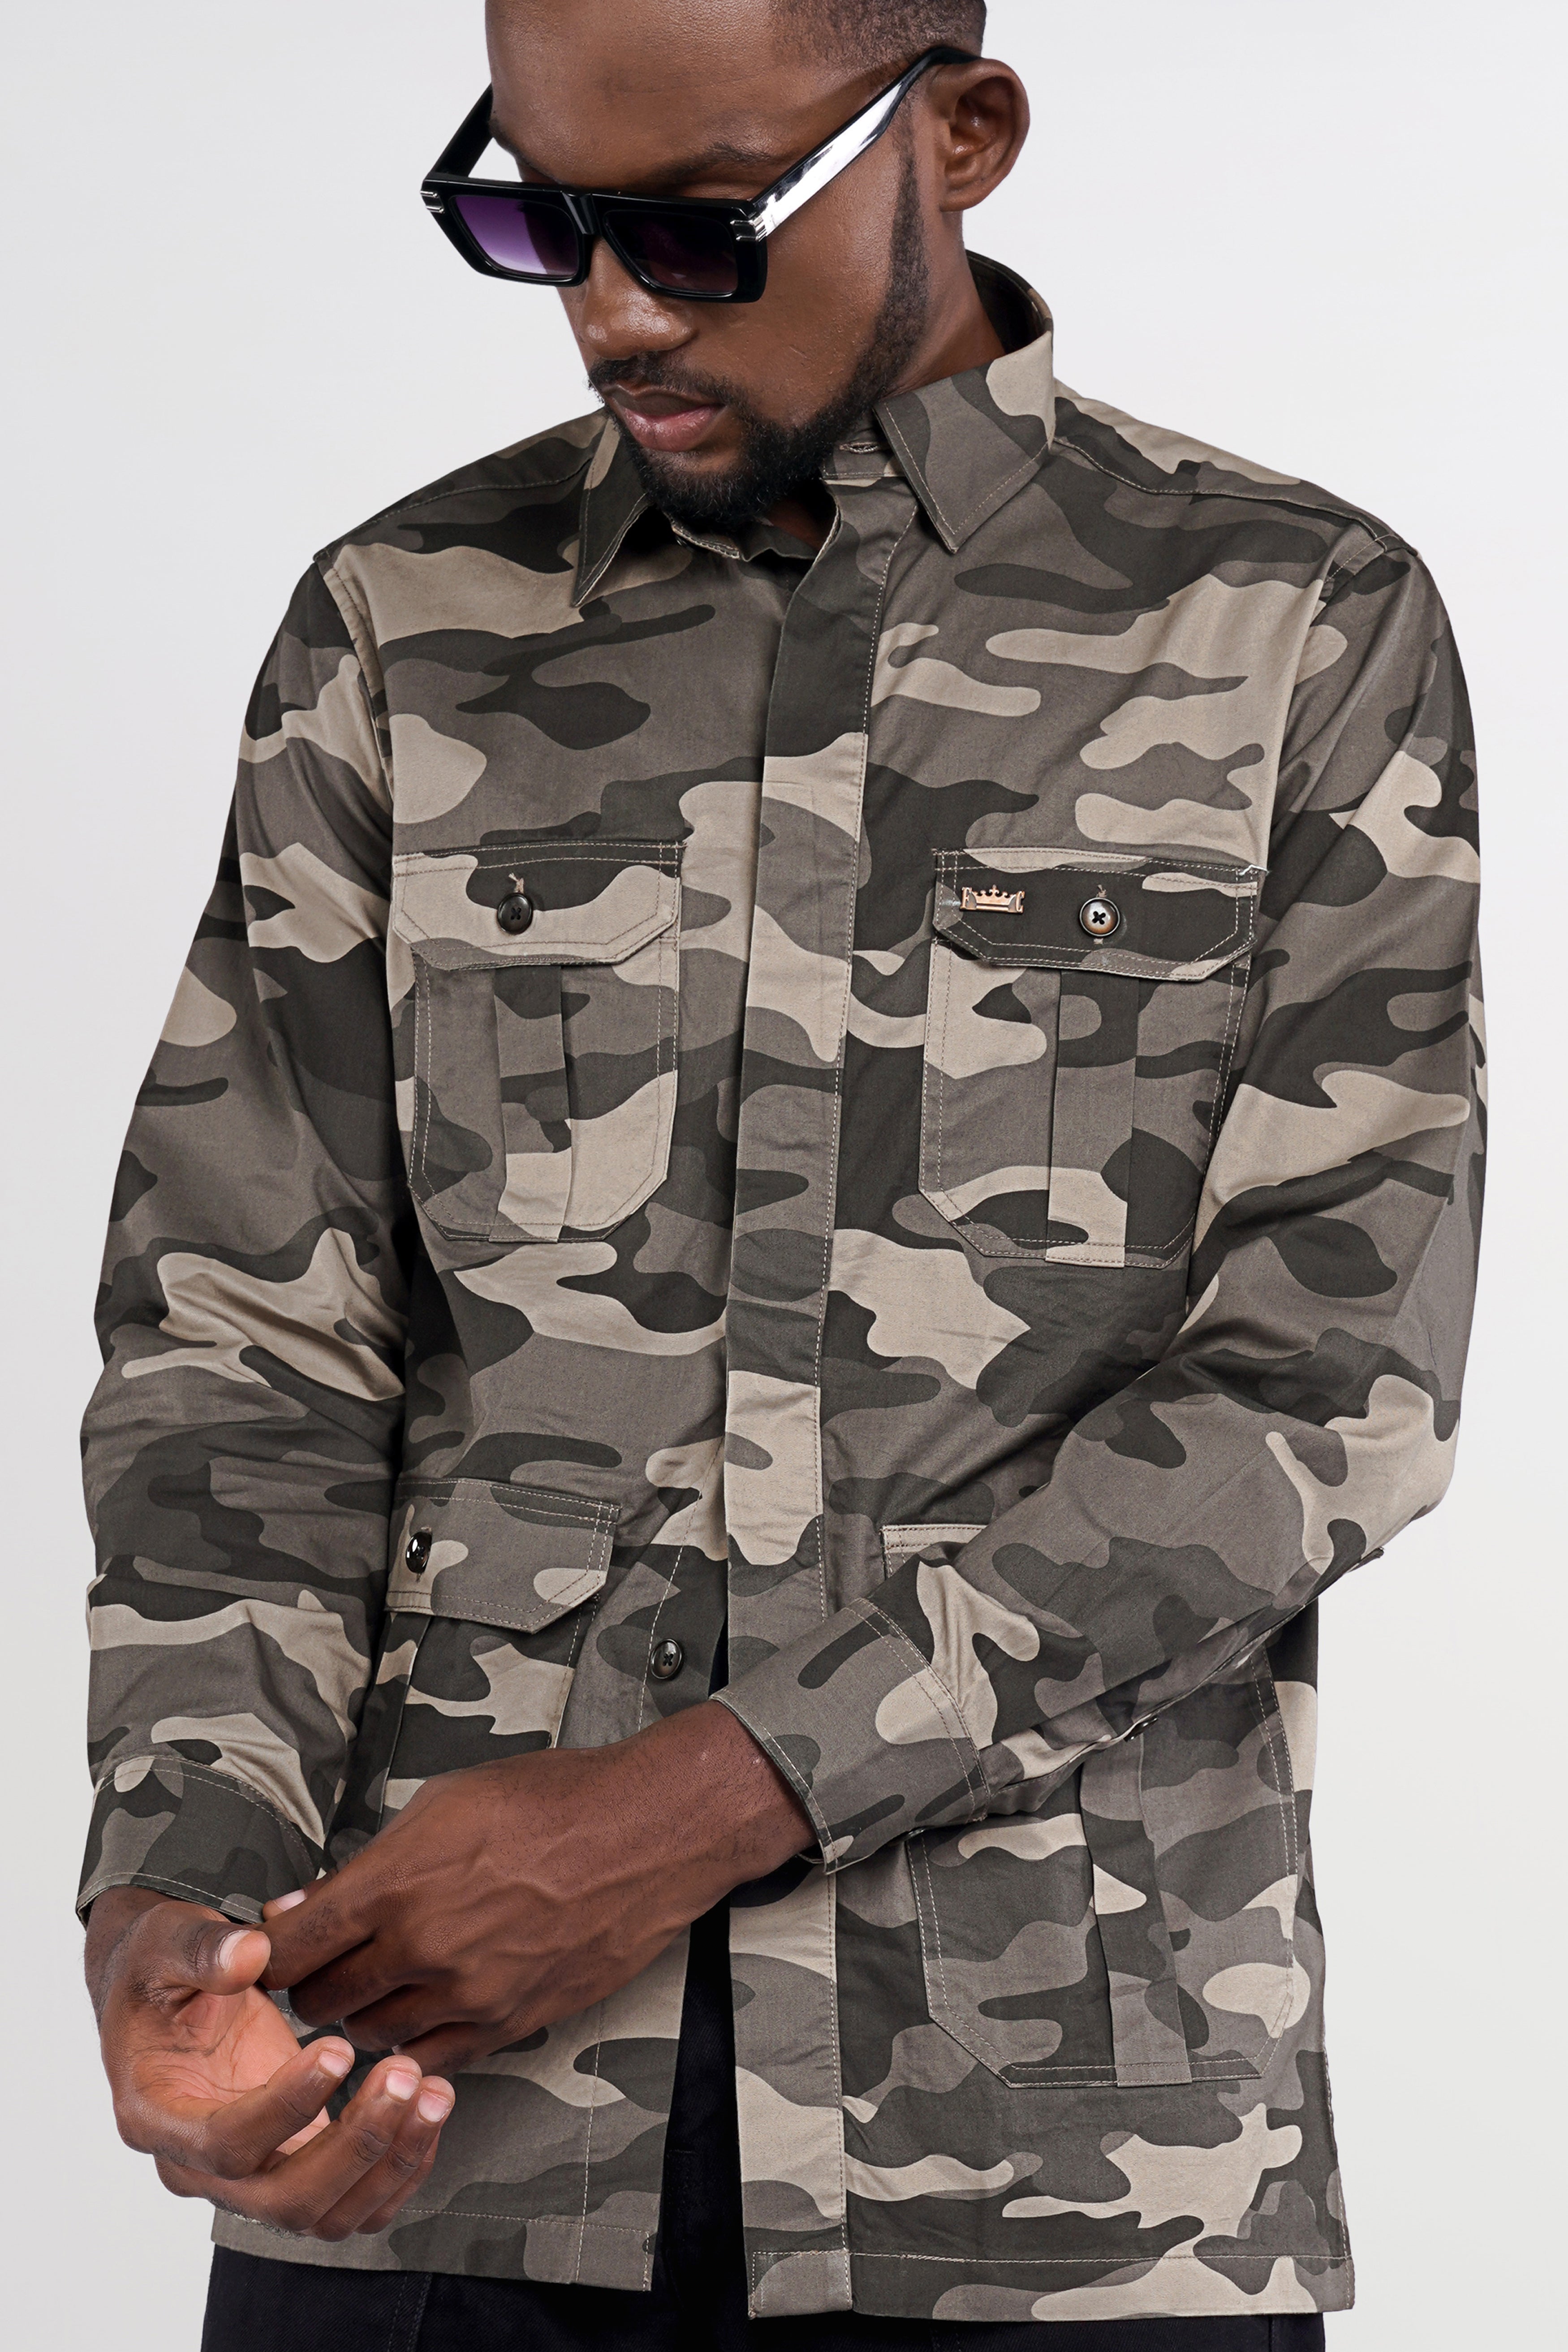 Thatch Brown with Dune Black Camouflage Printed Royal Oxford Designer Shirt